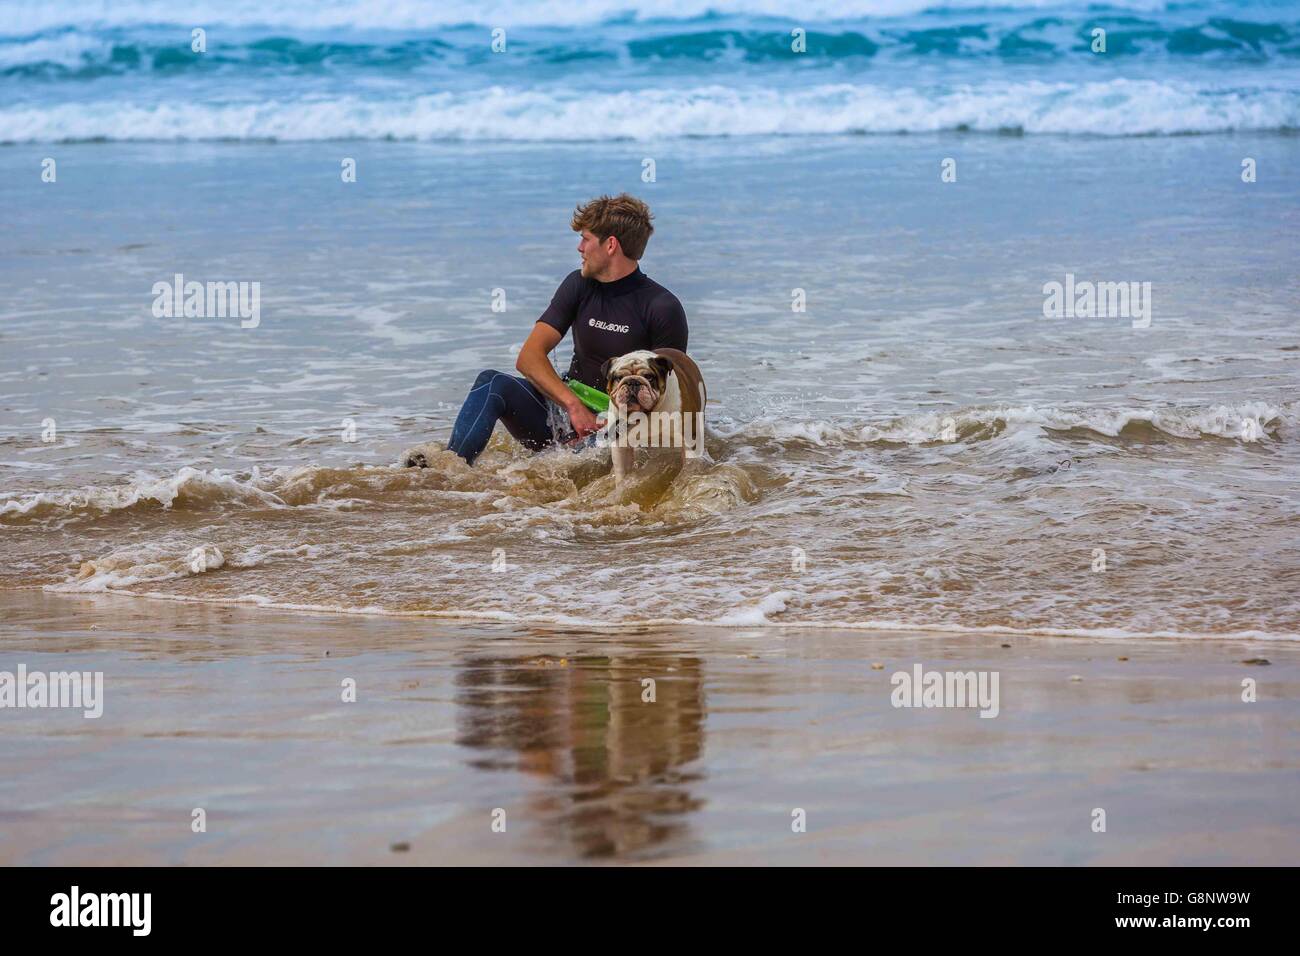 a surfer meets the beach at Fistral Beach, Newquay, Cornwall Stock Photo